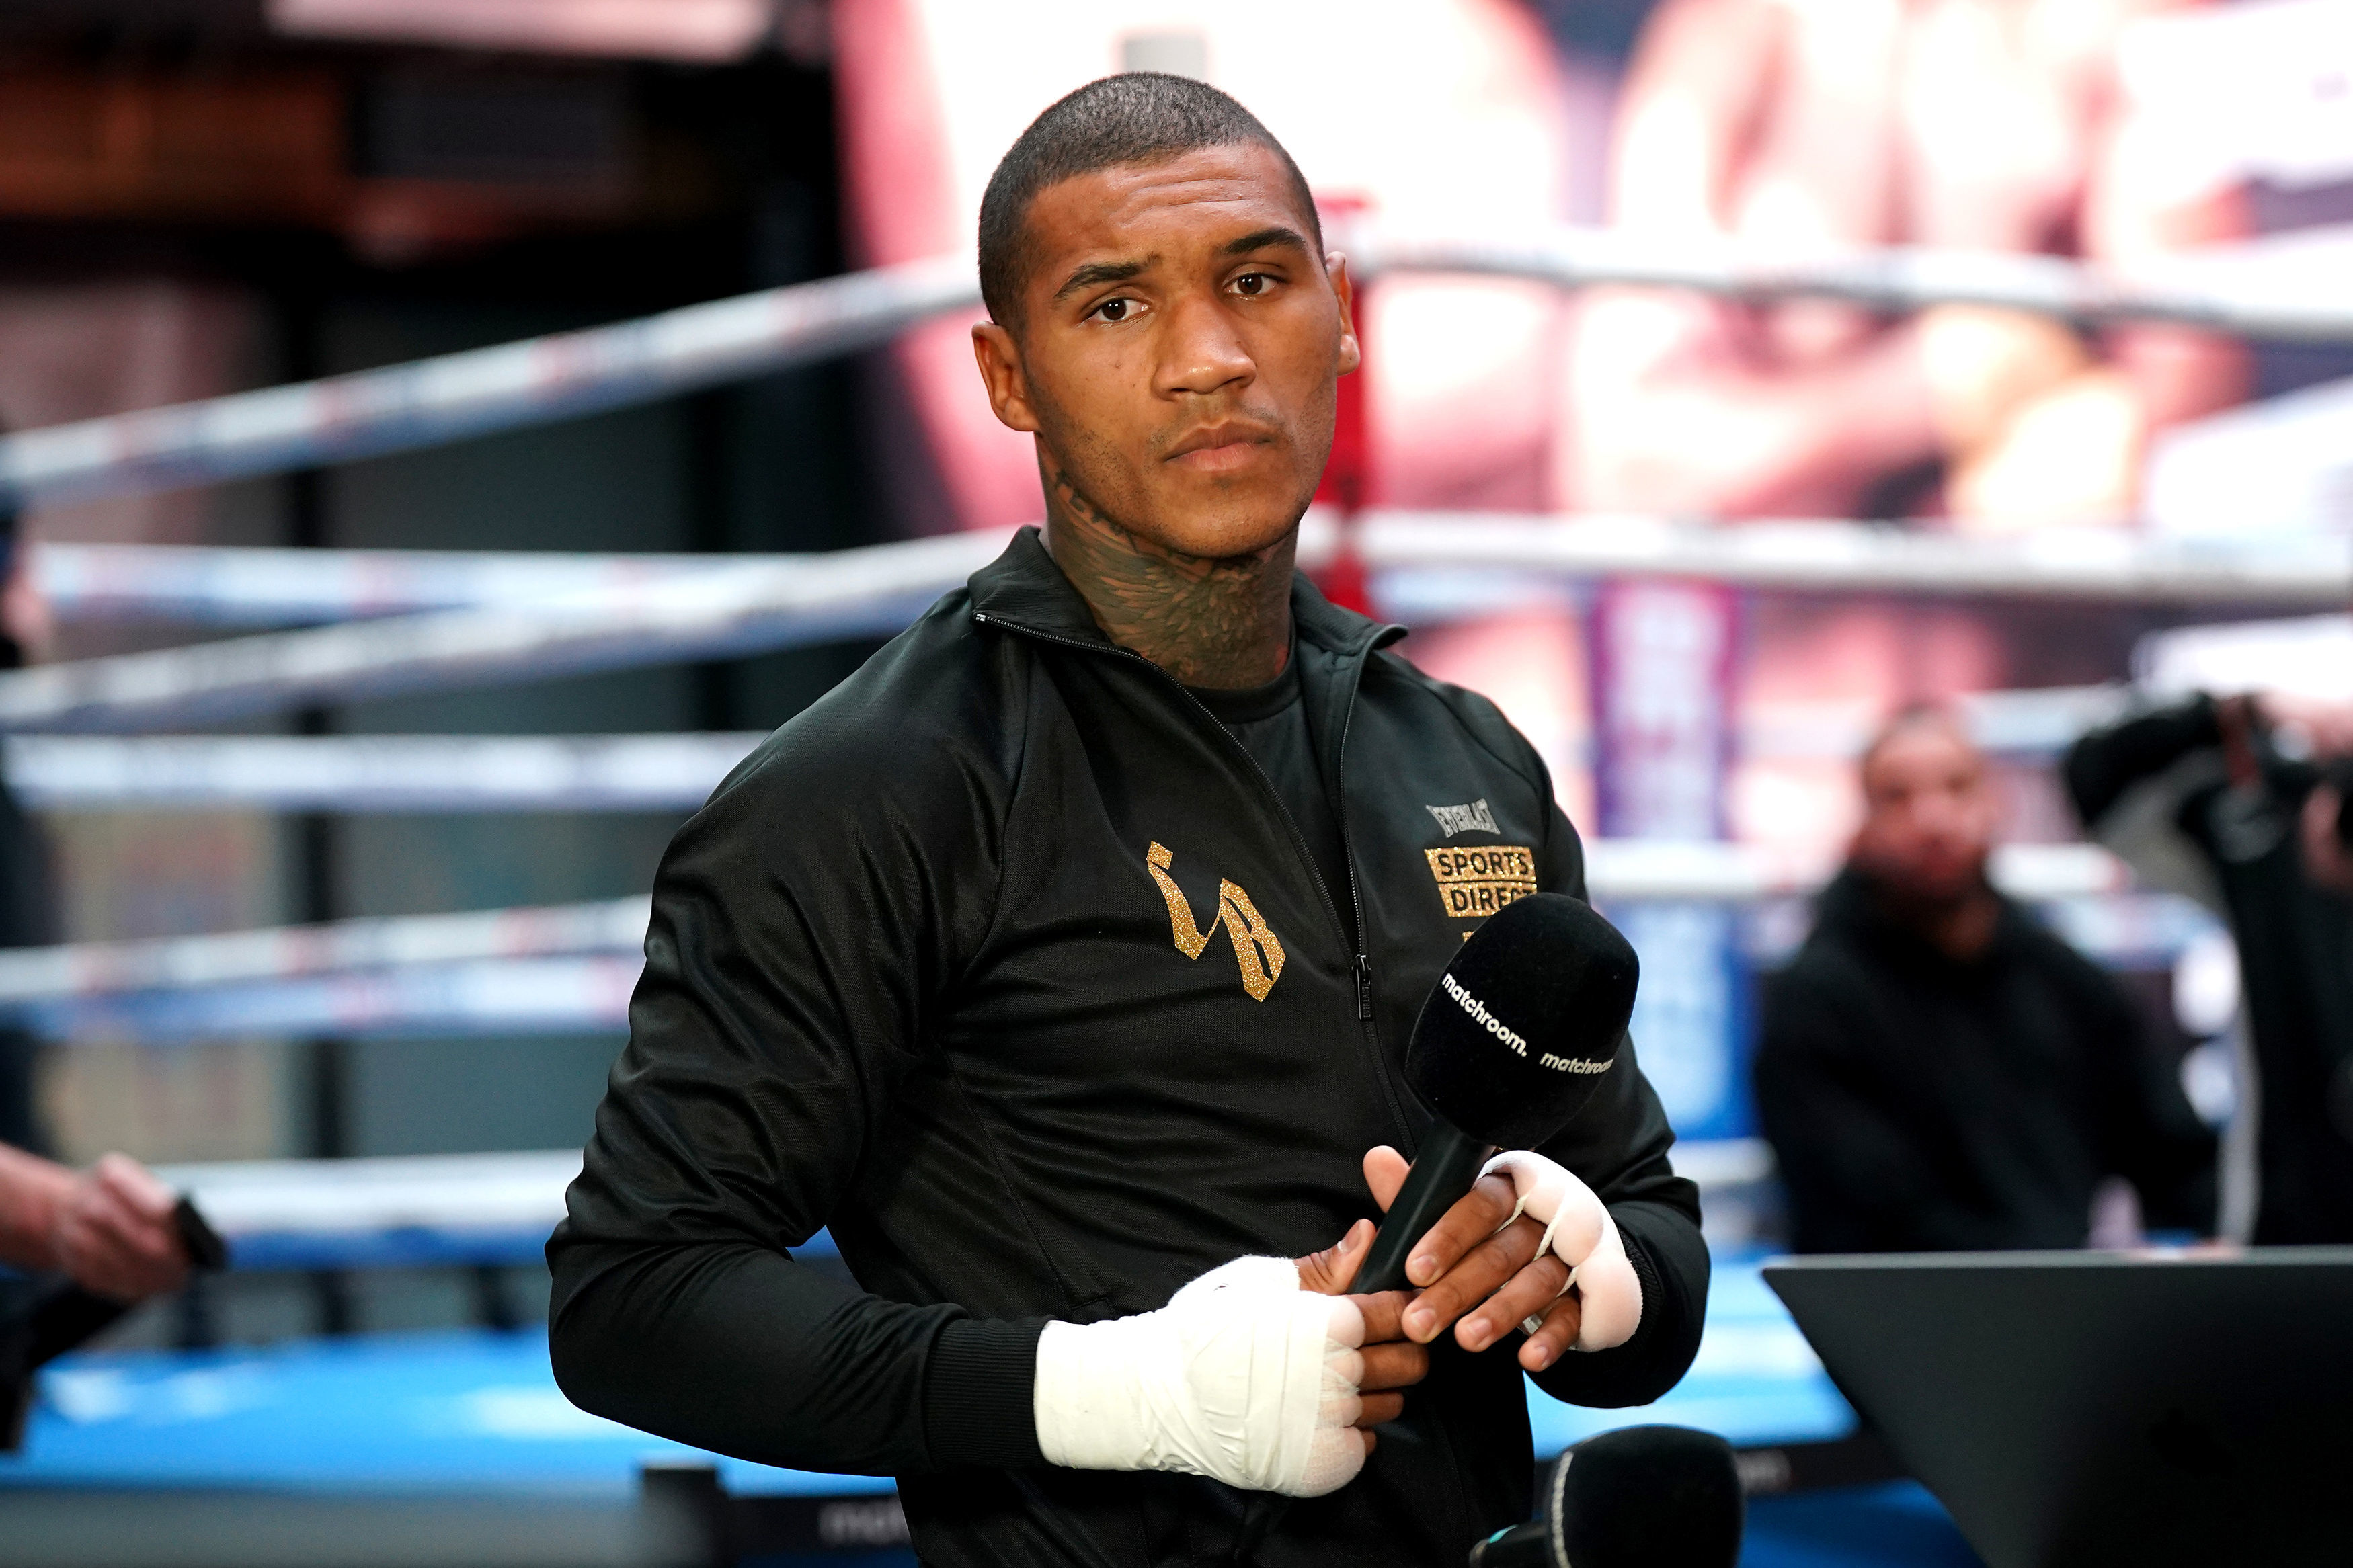 , Conor Benn planning to sue British boxing chiefs for £3.5MILLION over drug test drama that KOd Chris Eubank fight